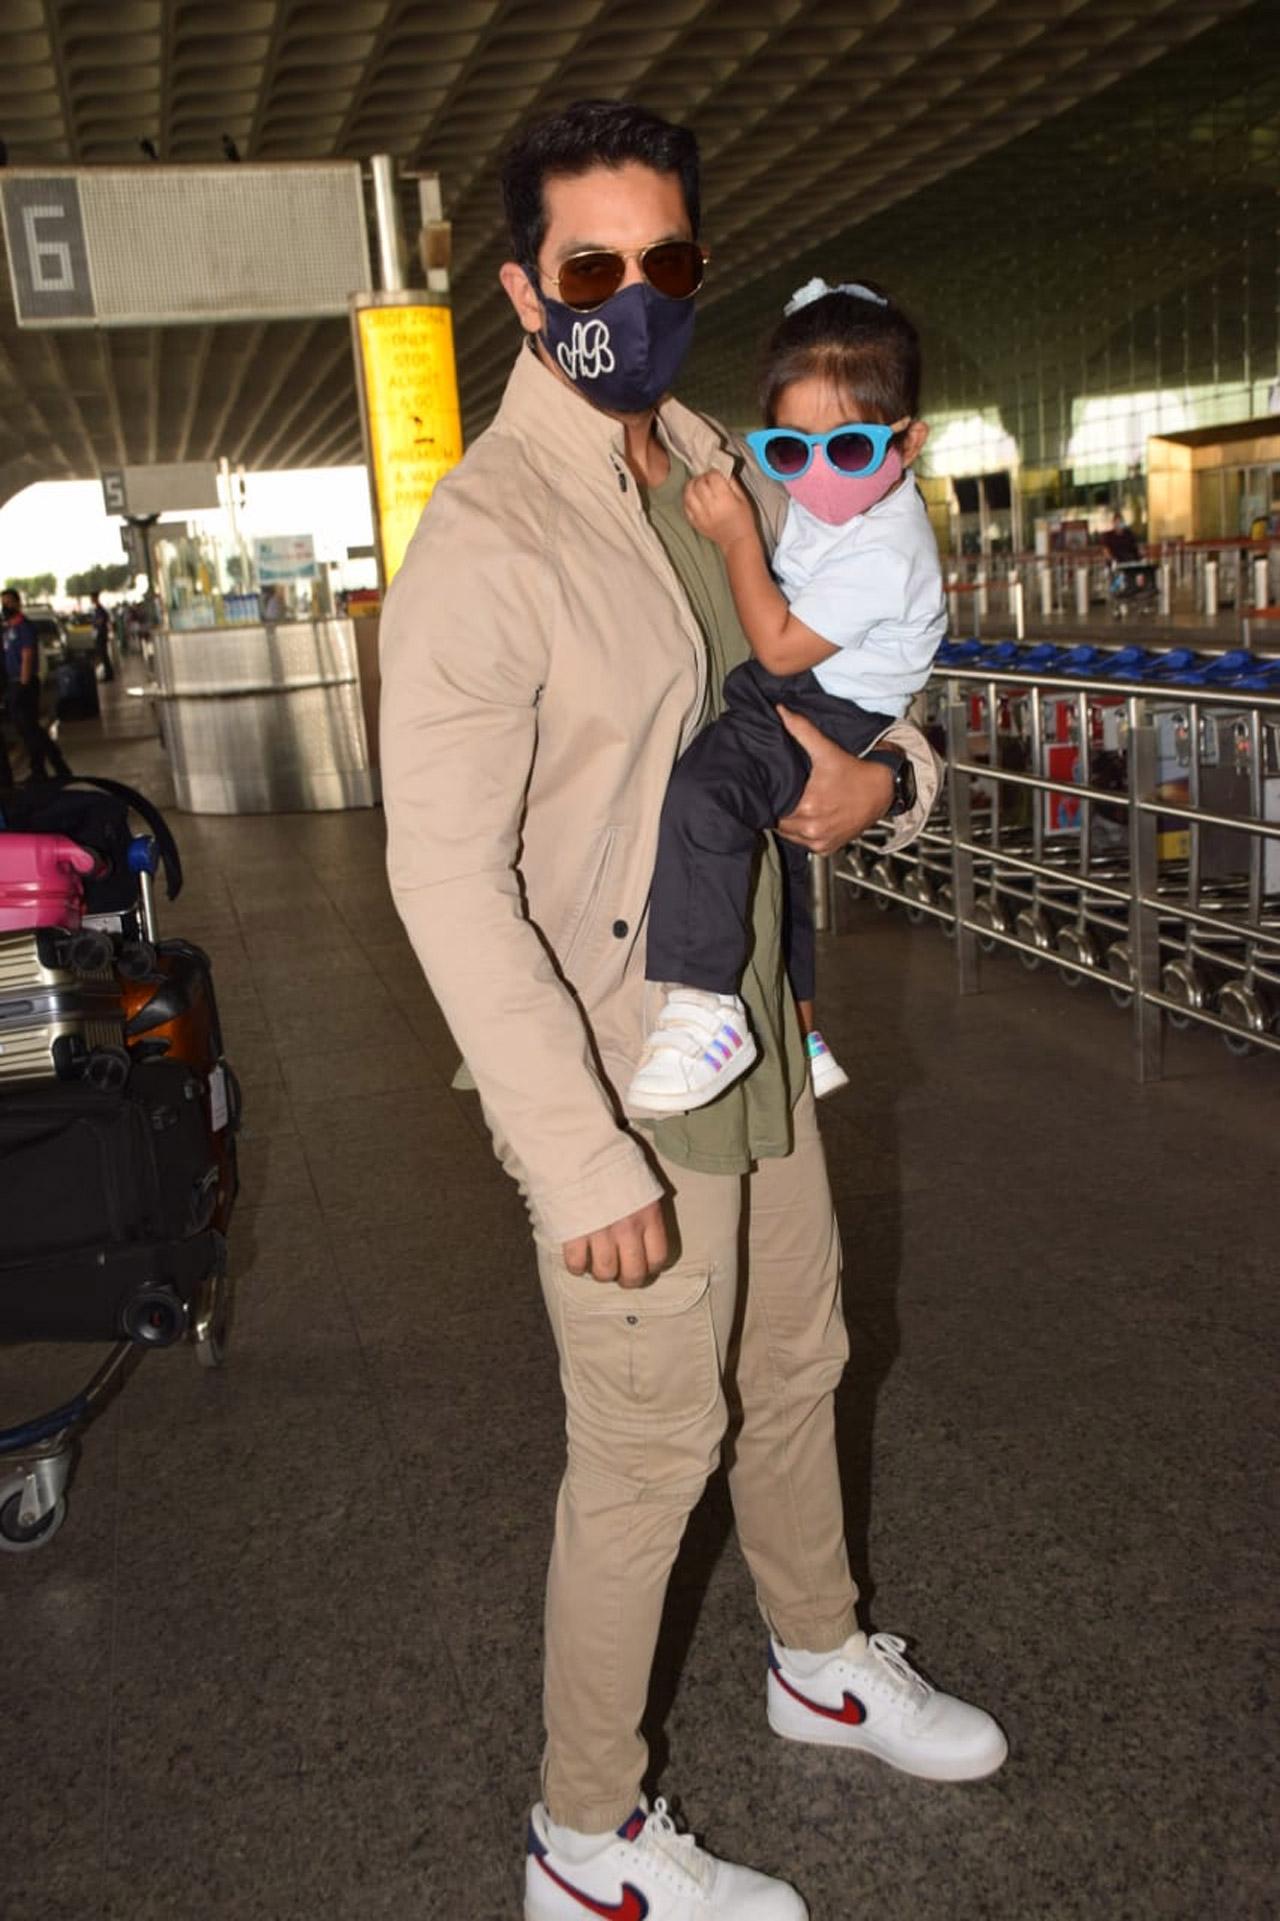 Angad Bedi was clicked with his daughter Mehr Dhupia Bedi at Mumbai airport. The father-daughter duo, who completed covered their faces with mask and sunglasses, got clicked in a rather amusing pose.